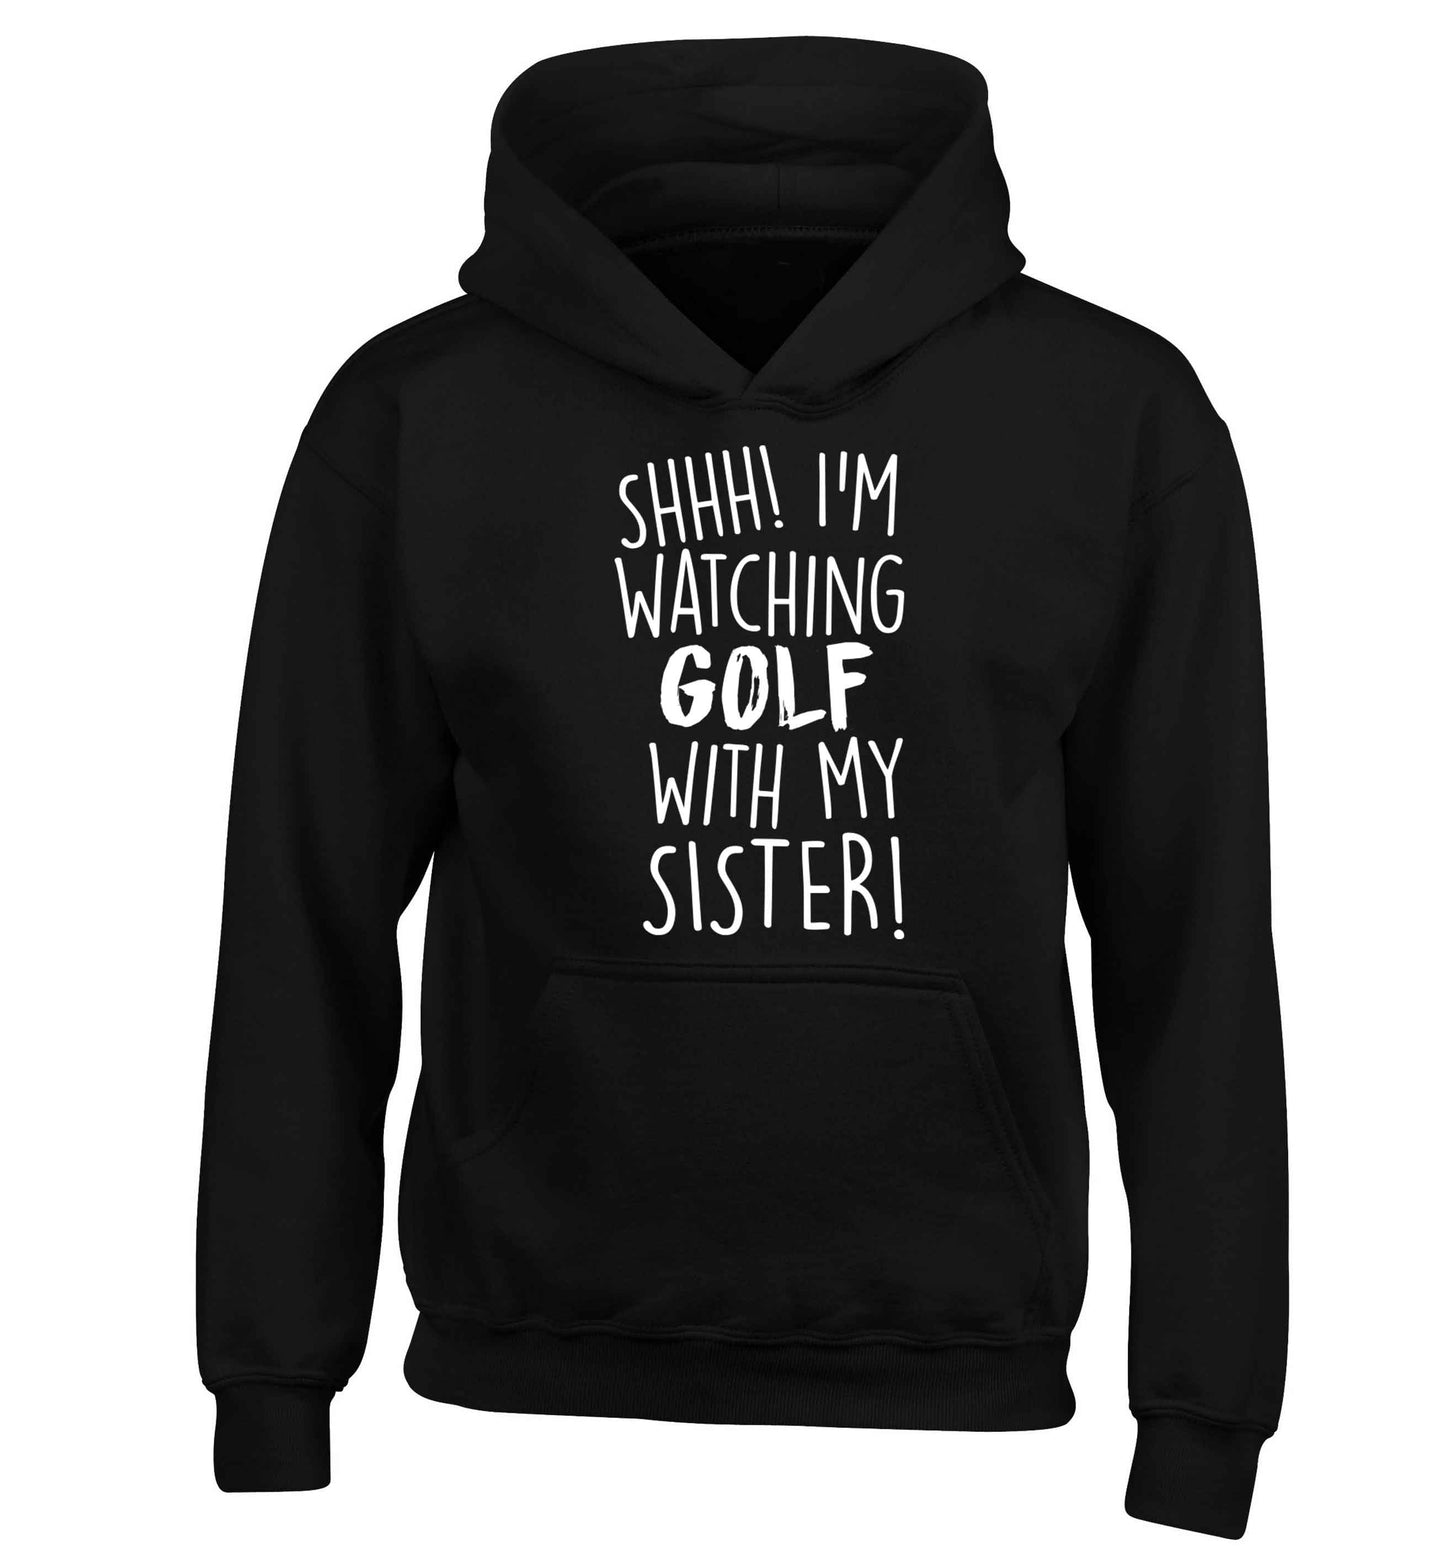 Shh I'm watching golf with my sister children's black hoodie 12-13 Years